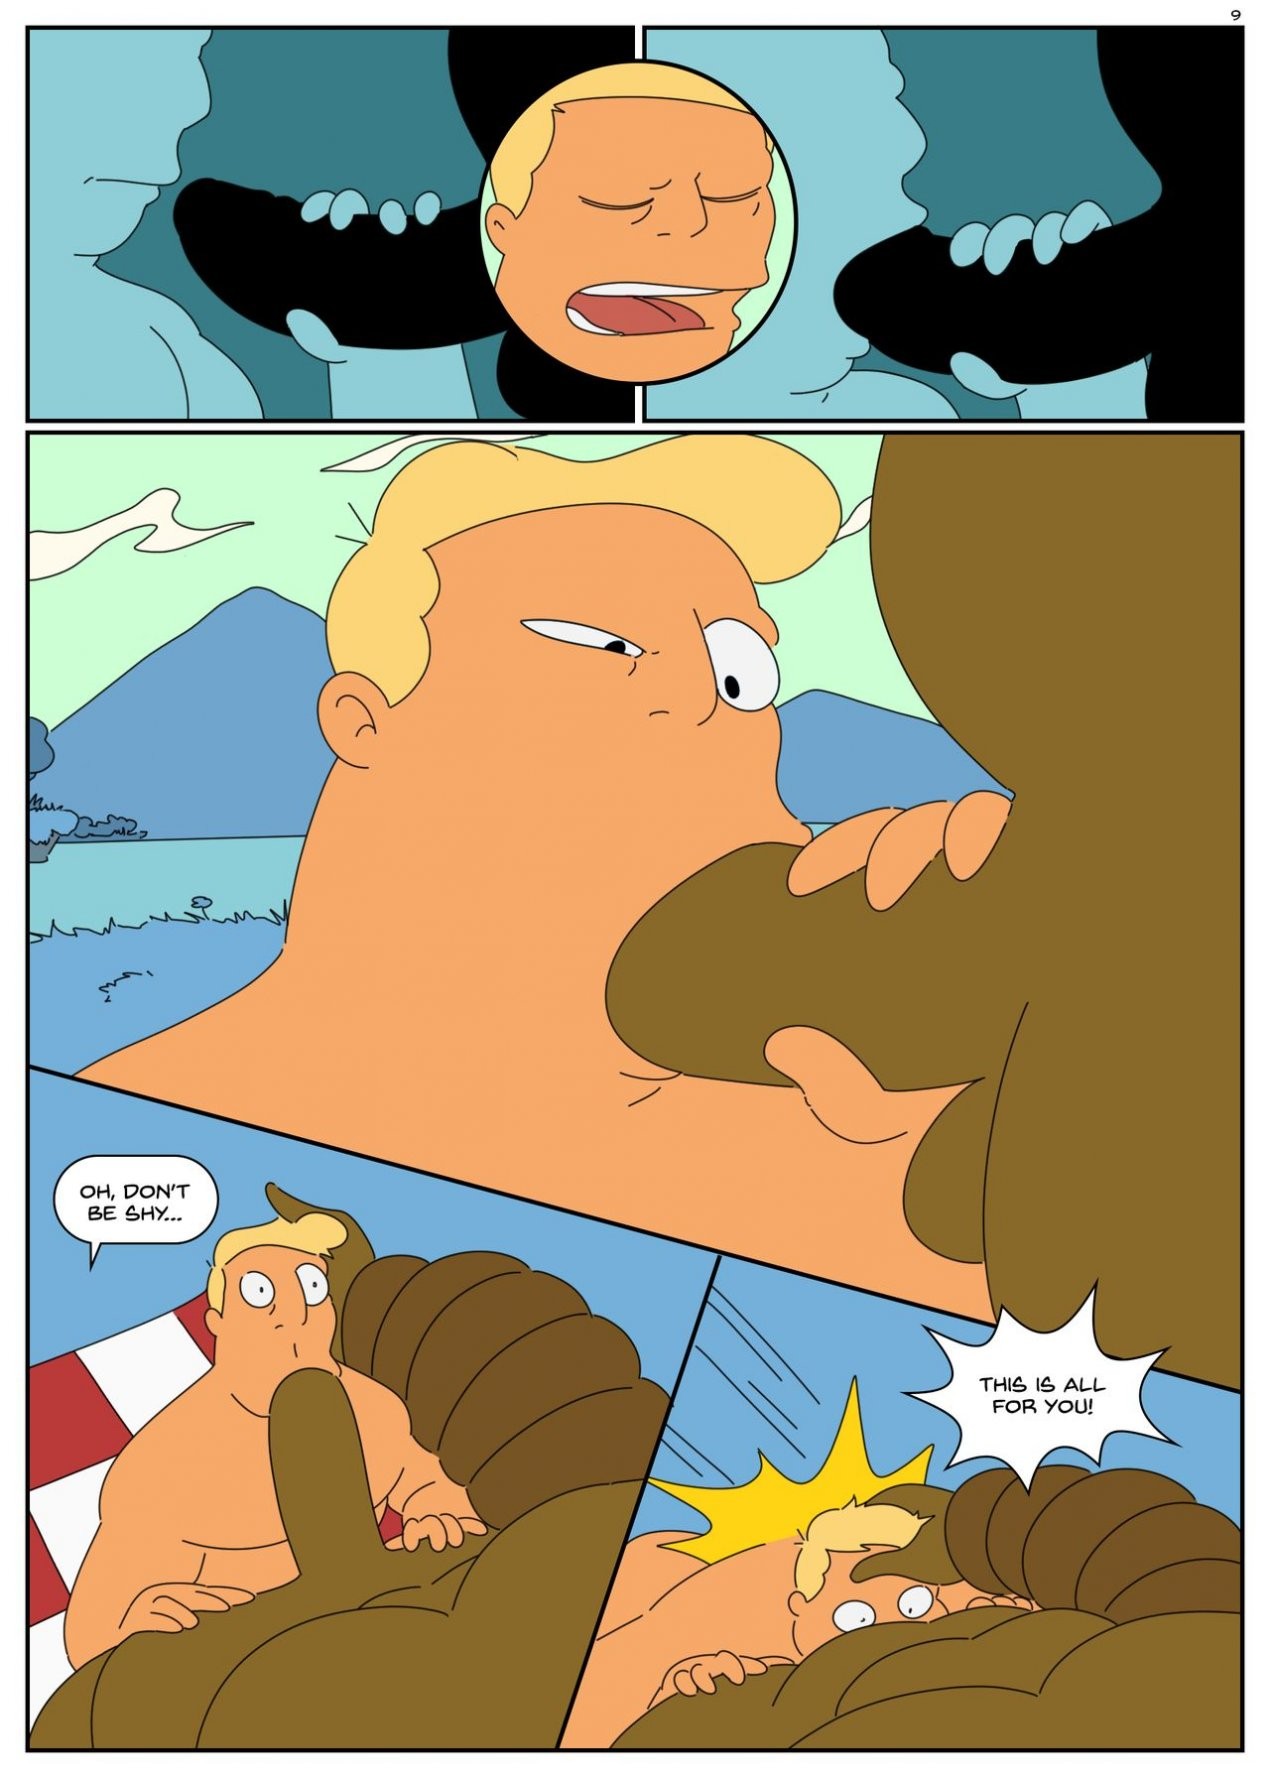 ZAPP BRANNIGAN & THE MISTERIOUS OMICRONIAN porn comic picture 10